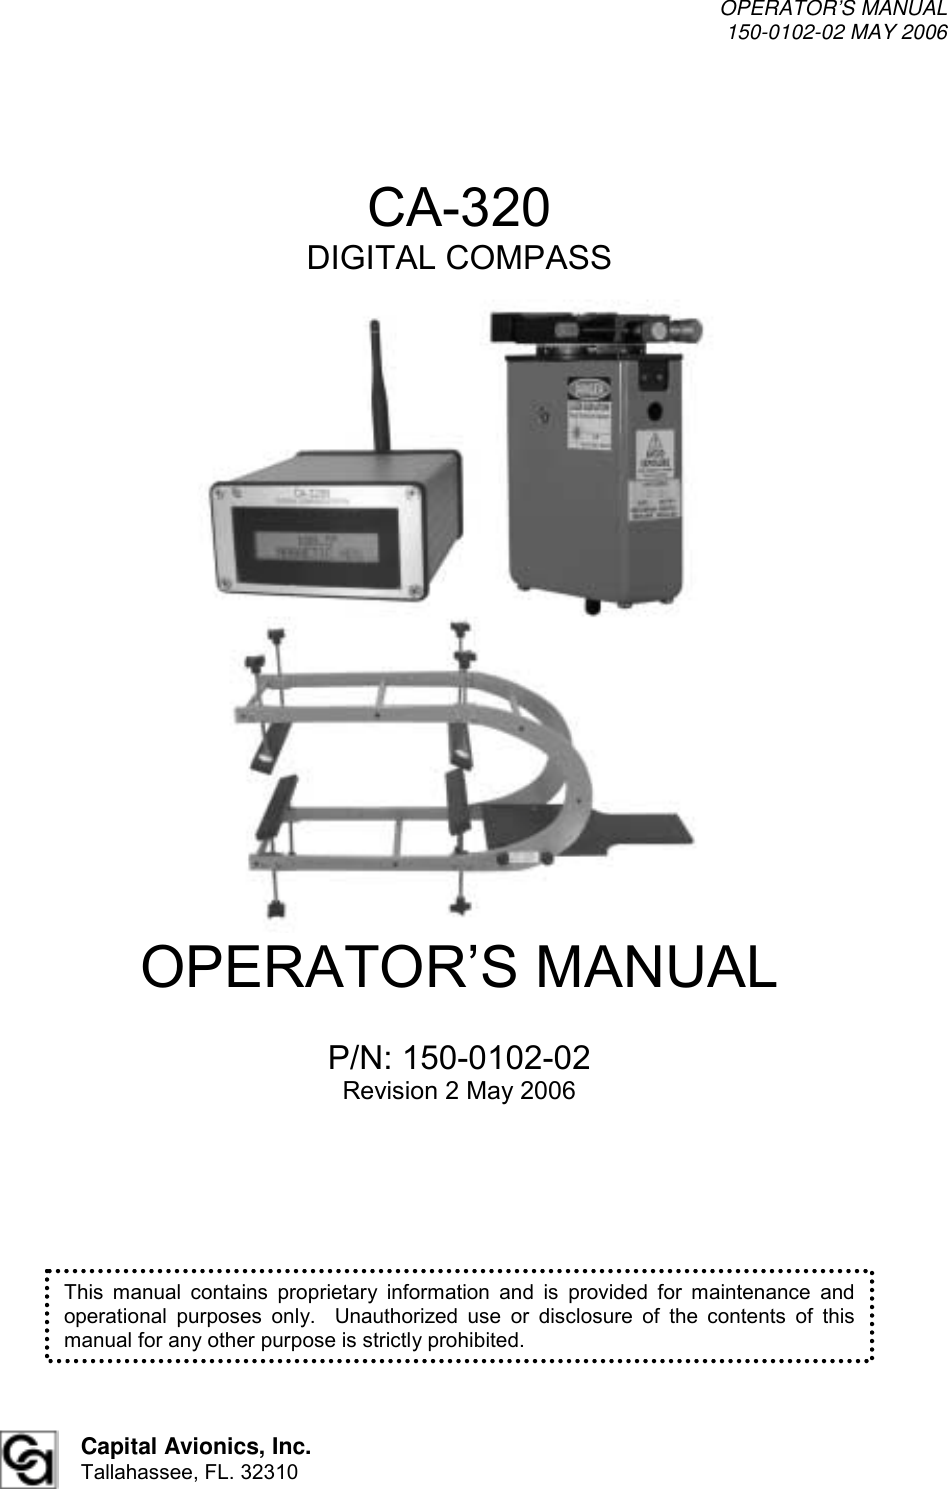 OPERATOR’S MANUAL 150-0102-02 MAY 2006  Capital Avionics, Inc. Tallahassee, FL. 32310 CA-320 DIGITAL COMPASS                             OPERATOR’S MANUAL  P/N: 150-0102-02 Revision 2 May 2006 This manual contains proprietary information and is provided for maintenance and operational purposes only.  Unauthorized use or disclosure of the contents of this manual for any other purpose is strictly prohibited. 